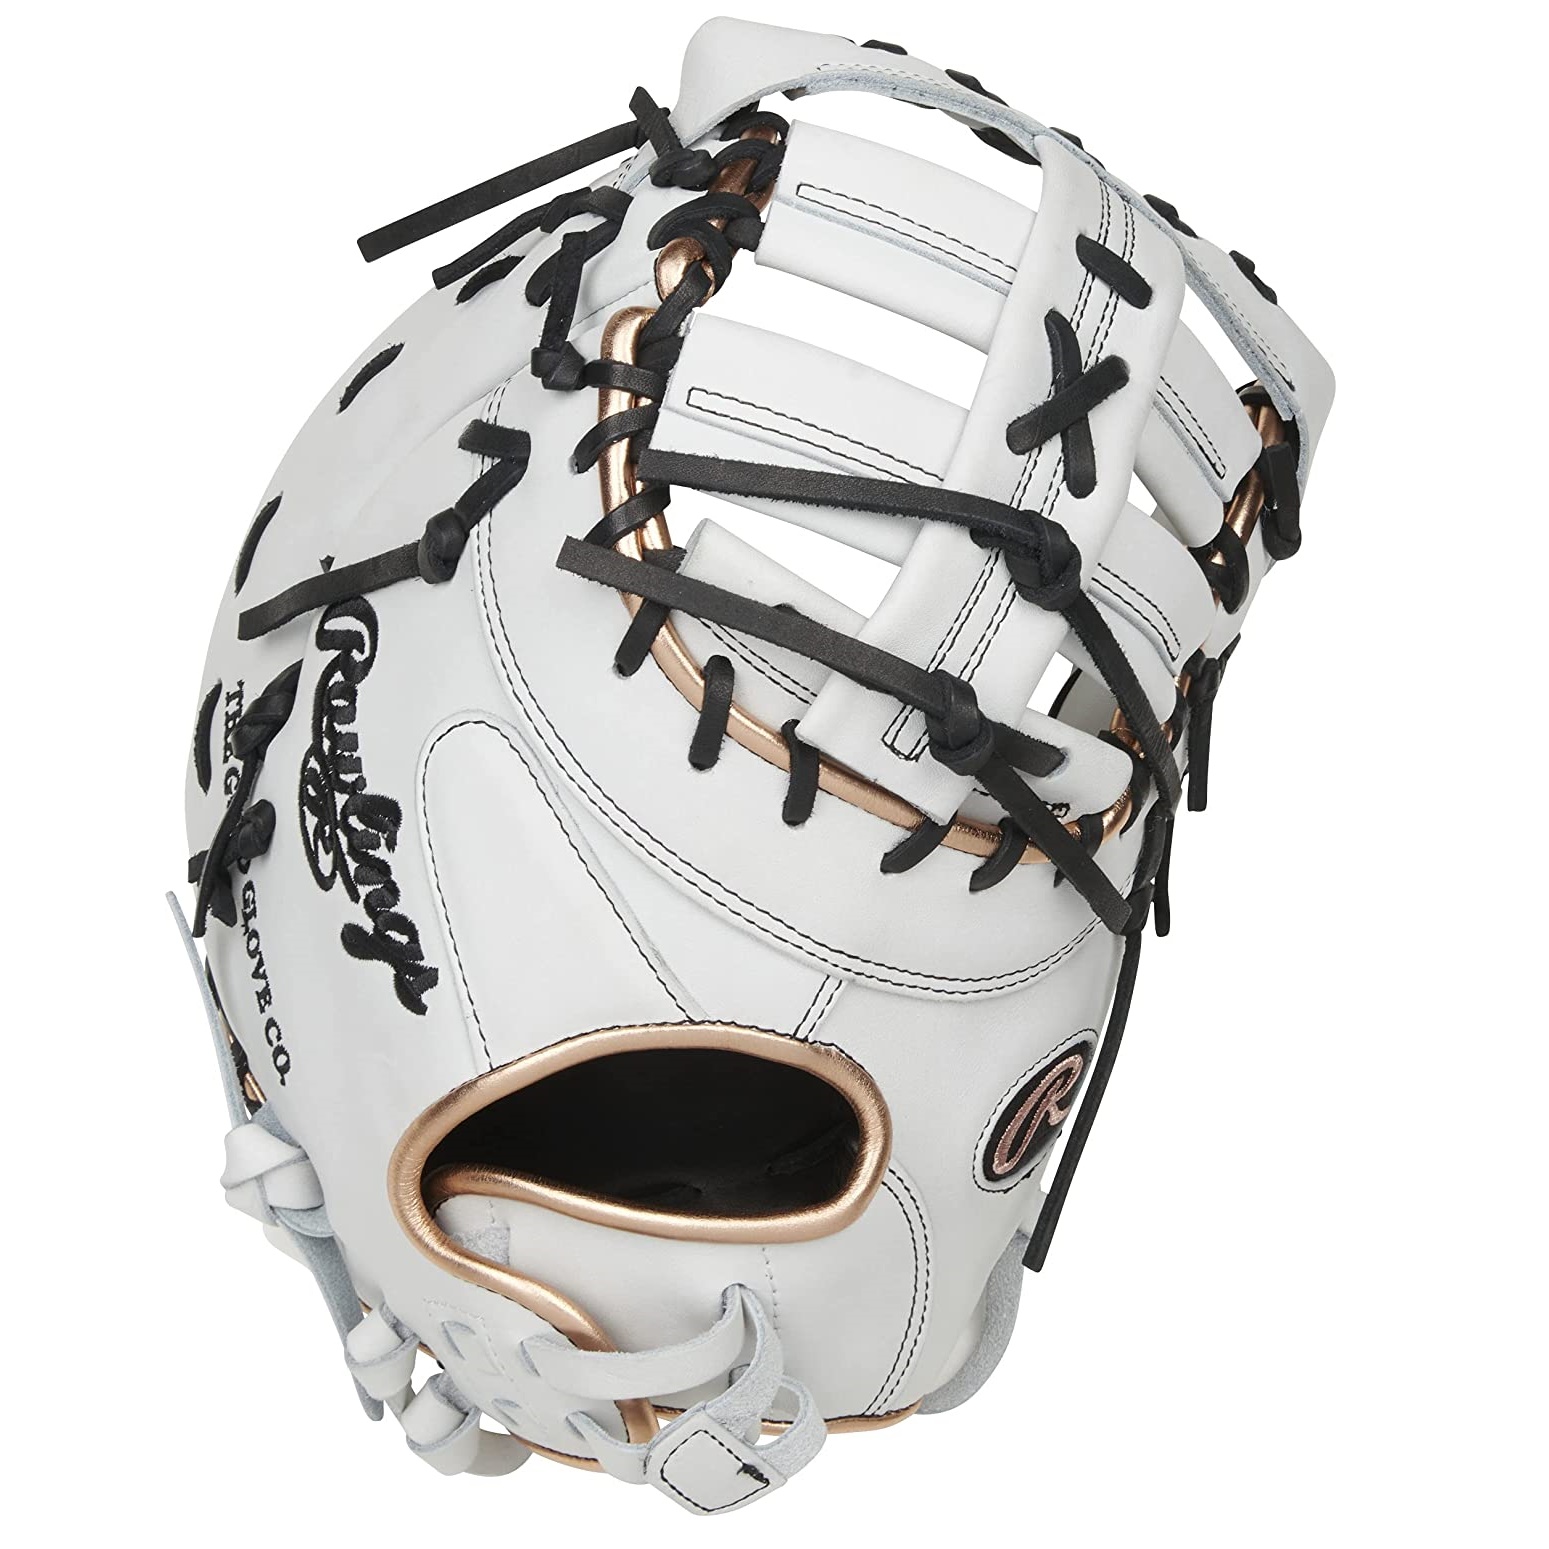 rawlings-heart-of-the-hide-first-base-softball-mitt-13-modified-single-post-web-right-hand-throw PRODCTSBW-RightHandThrow Rawlings  The Heart of the Hide fastpitch softball gloves from Rawlings provide